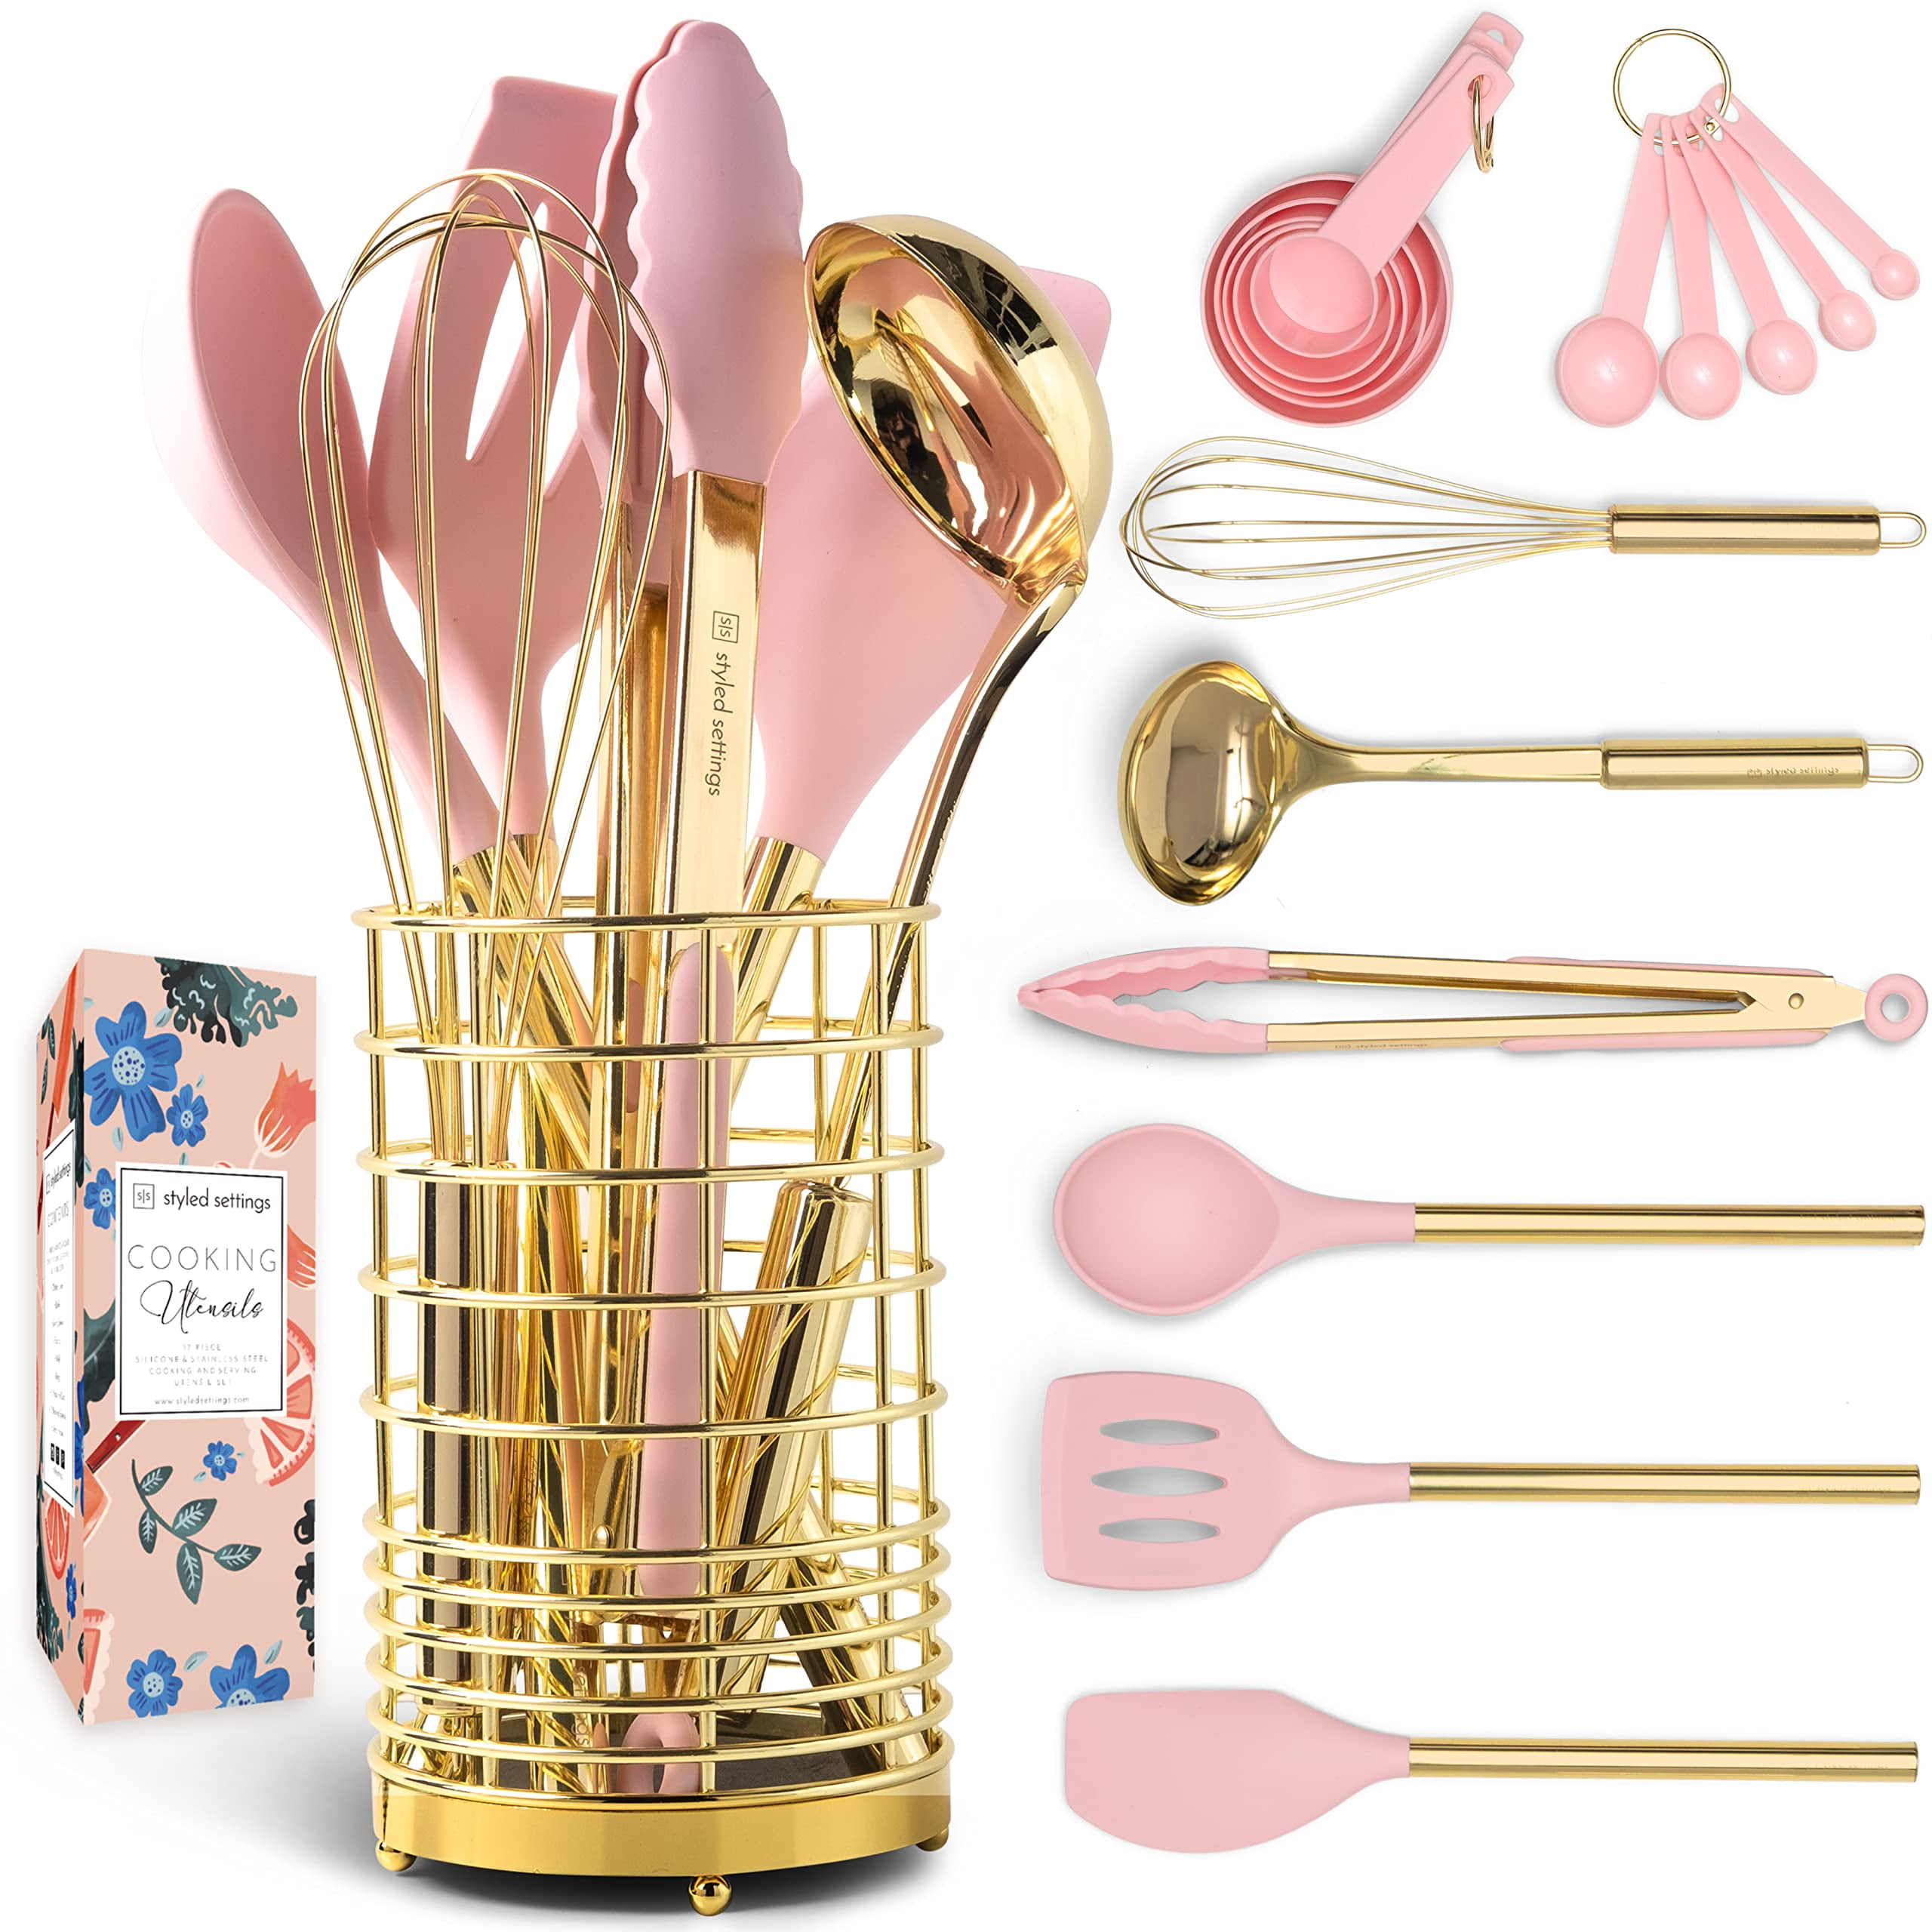 STYLED SETTINGS White Silicone and Gold Kitchen Utensils Set for Modern  Cooking and Serving, Stainless Steel Gold Cooking Utensils and Gold Serving  Utensils- Lu…